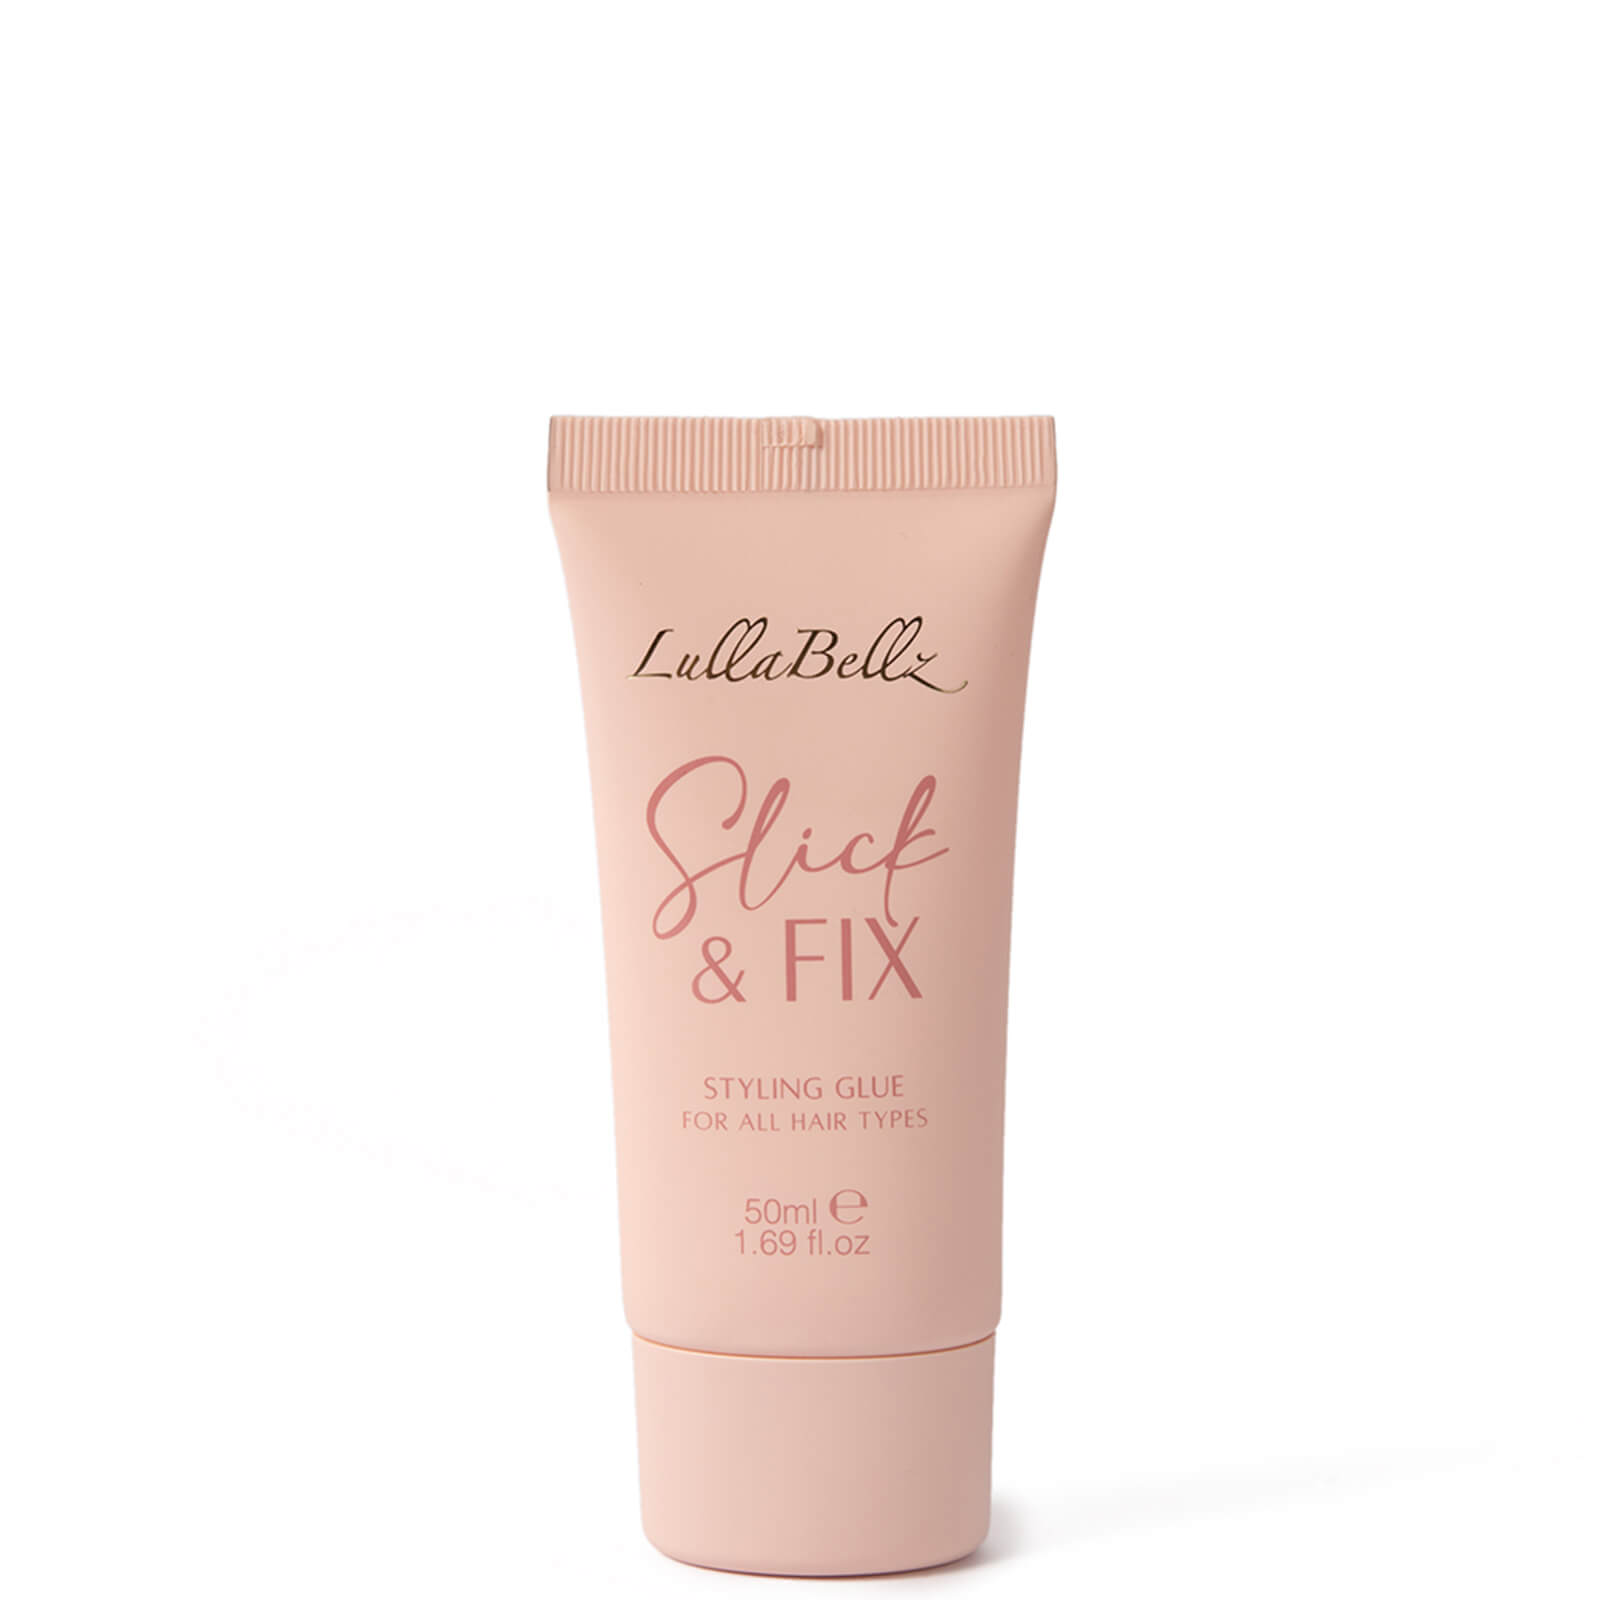 Lullabellz Slick And Fix Styling Glue 50ml